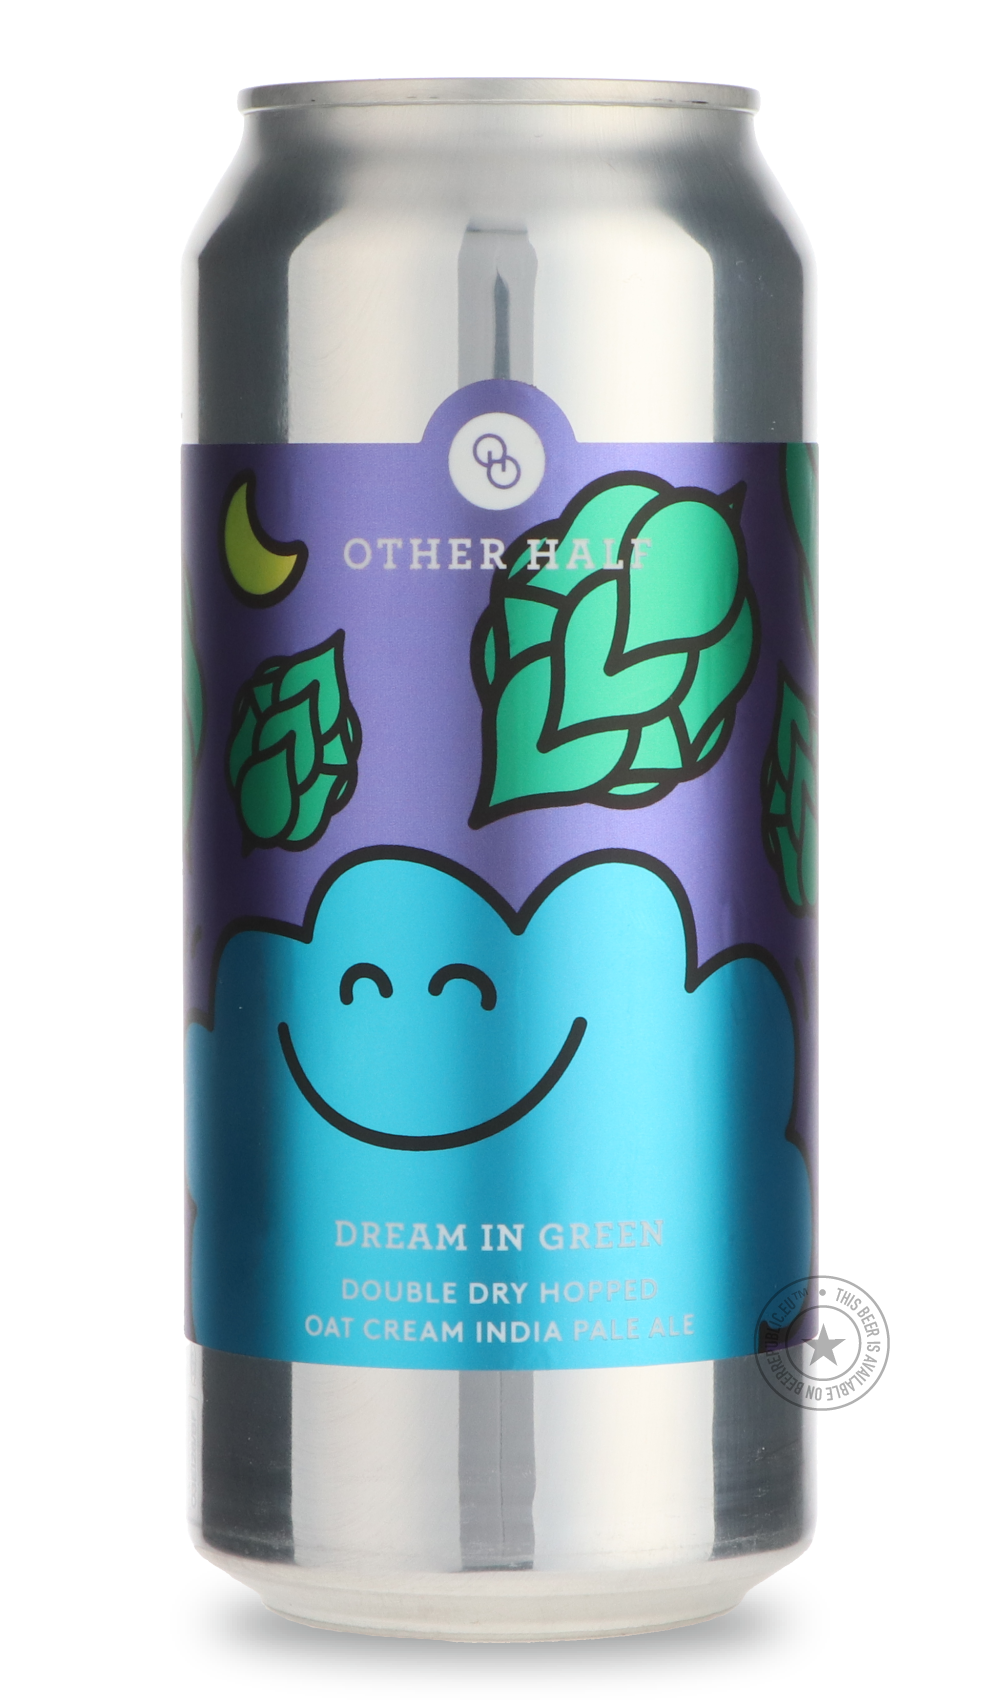 -Other Half- DDH Dream In Green-IPA- Only @ Beer Republic - The best online beer store for American & Canadian craft beer - Buy beer online from the USA and Canada - Bier online kopen - Amerikaans bier kopen - Craft beer store - Craft beer kopen - Amerikanisch bier kaufen - Bier online kaufen - Acheter biere online - IPA - Stout - Porter - New England IPA - Hazy IPA - Imperial Stout - Barrel Aged - Barrel Aged Imperial Stout - Brown - Dark beer - Blond - Blonde - Pilsner - Lager - Wheat - Weizen - Amber - B